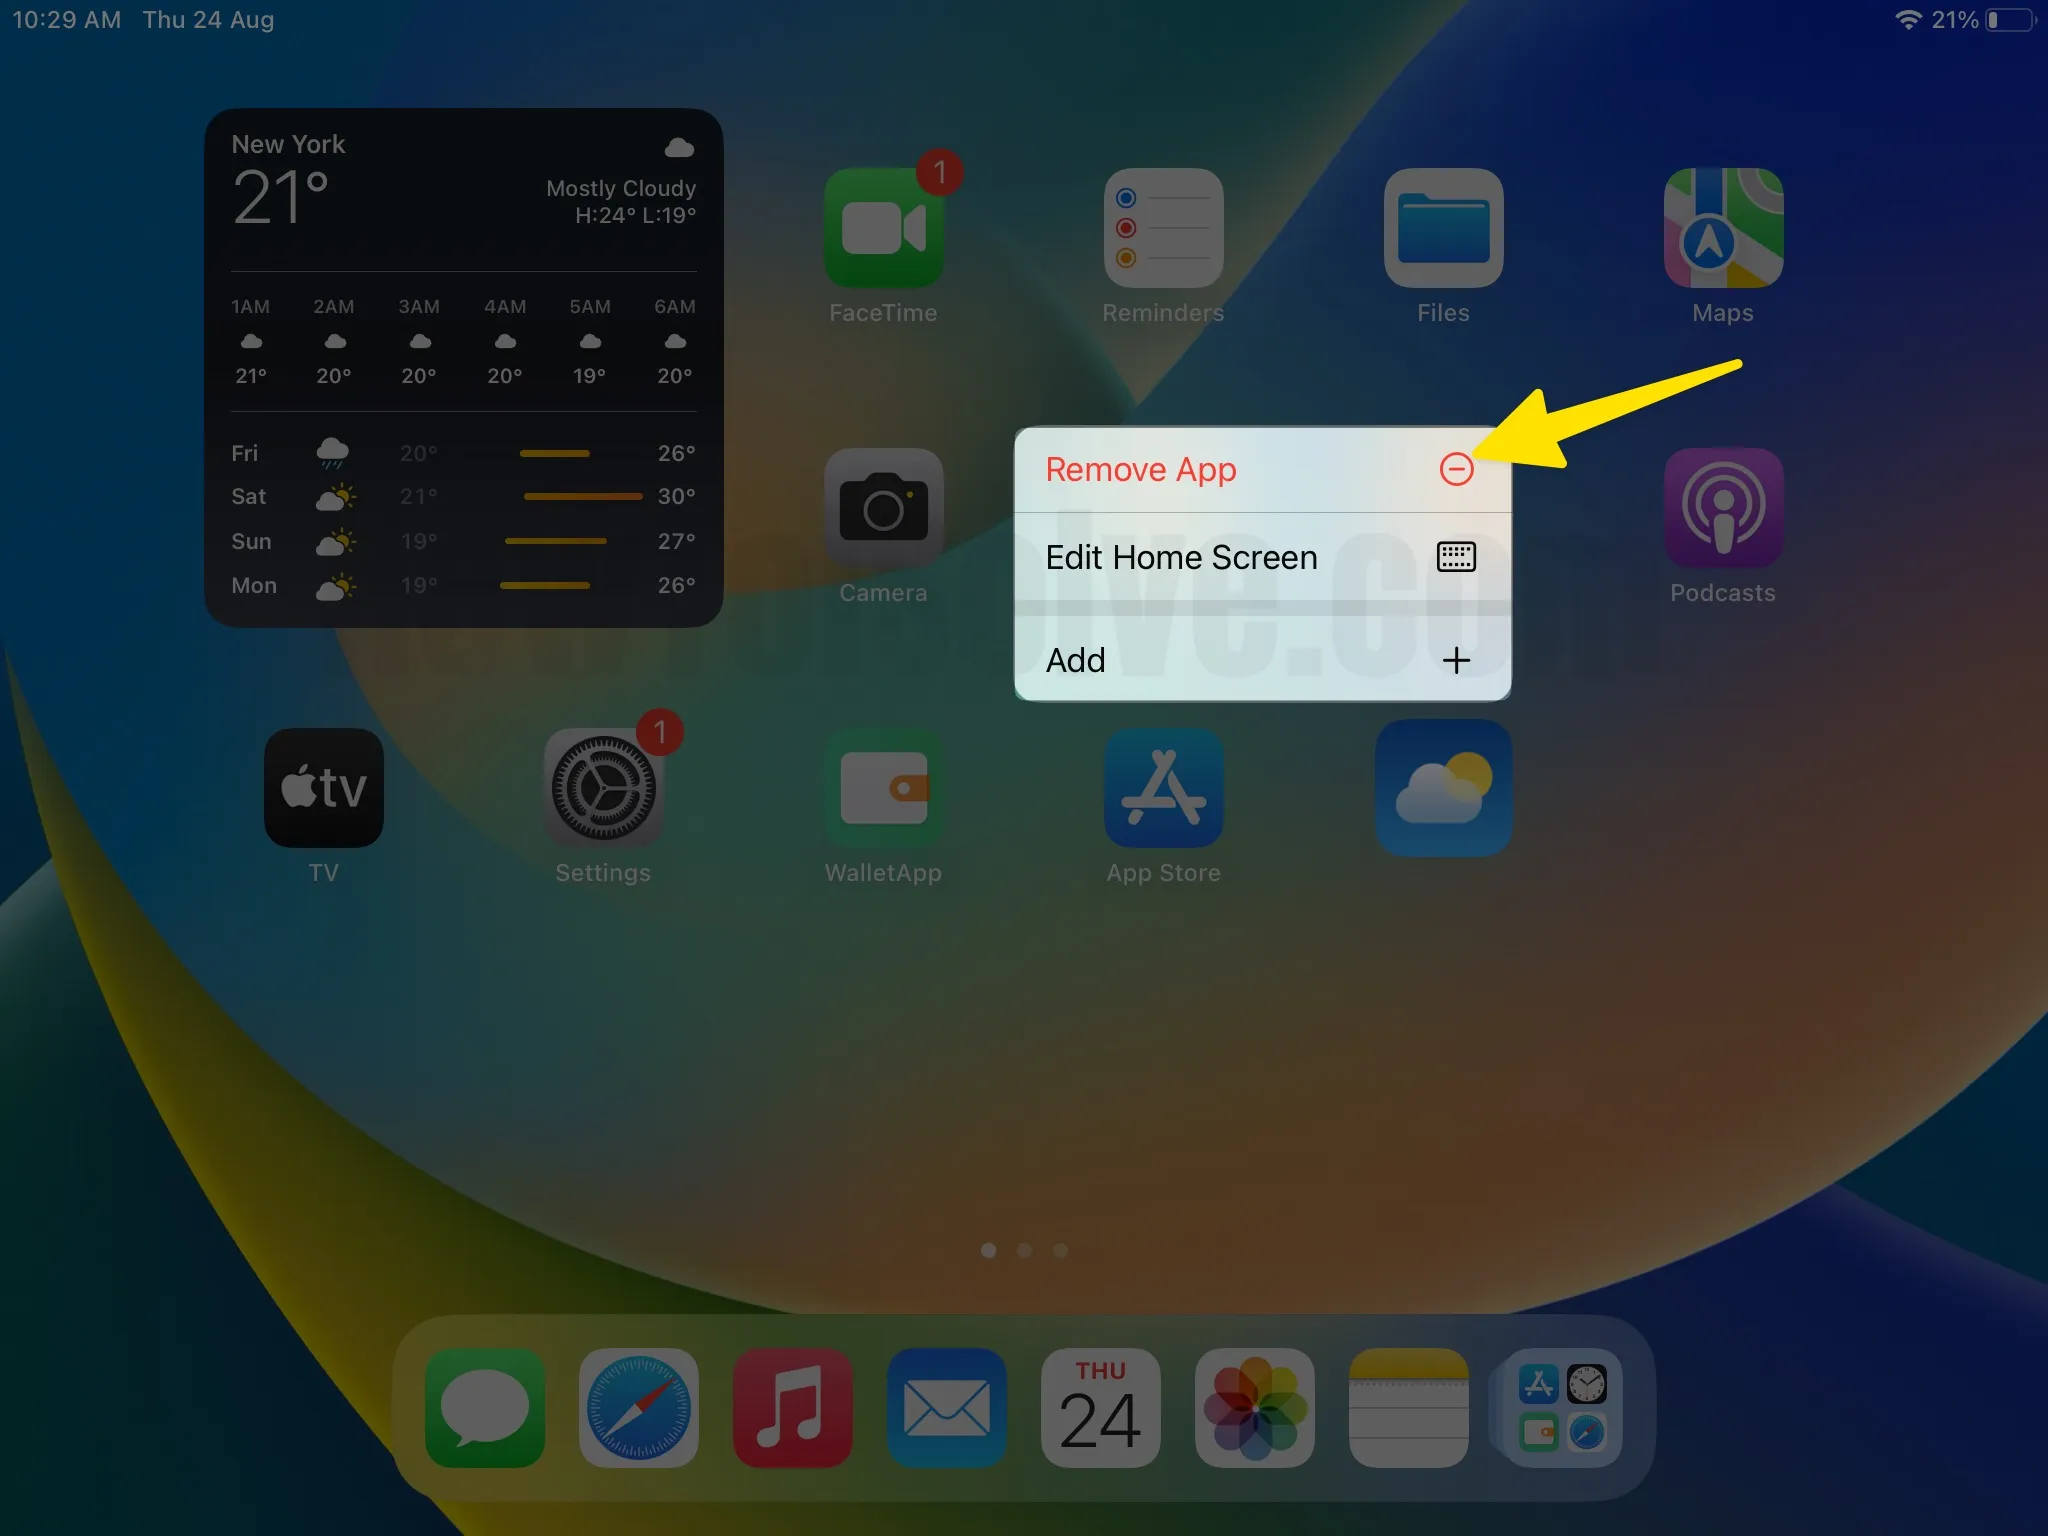 Tap remove app to delete an app on ipad